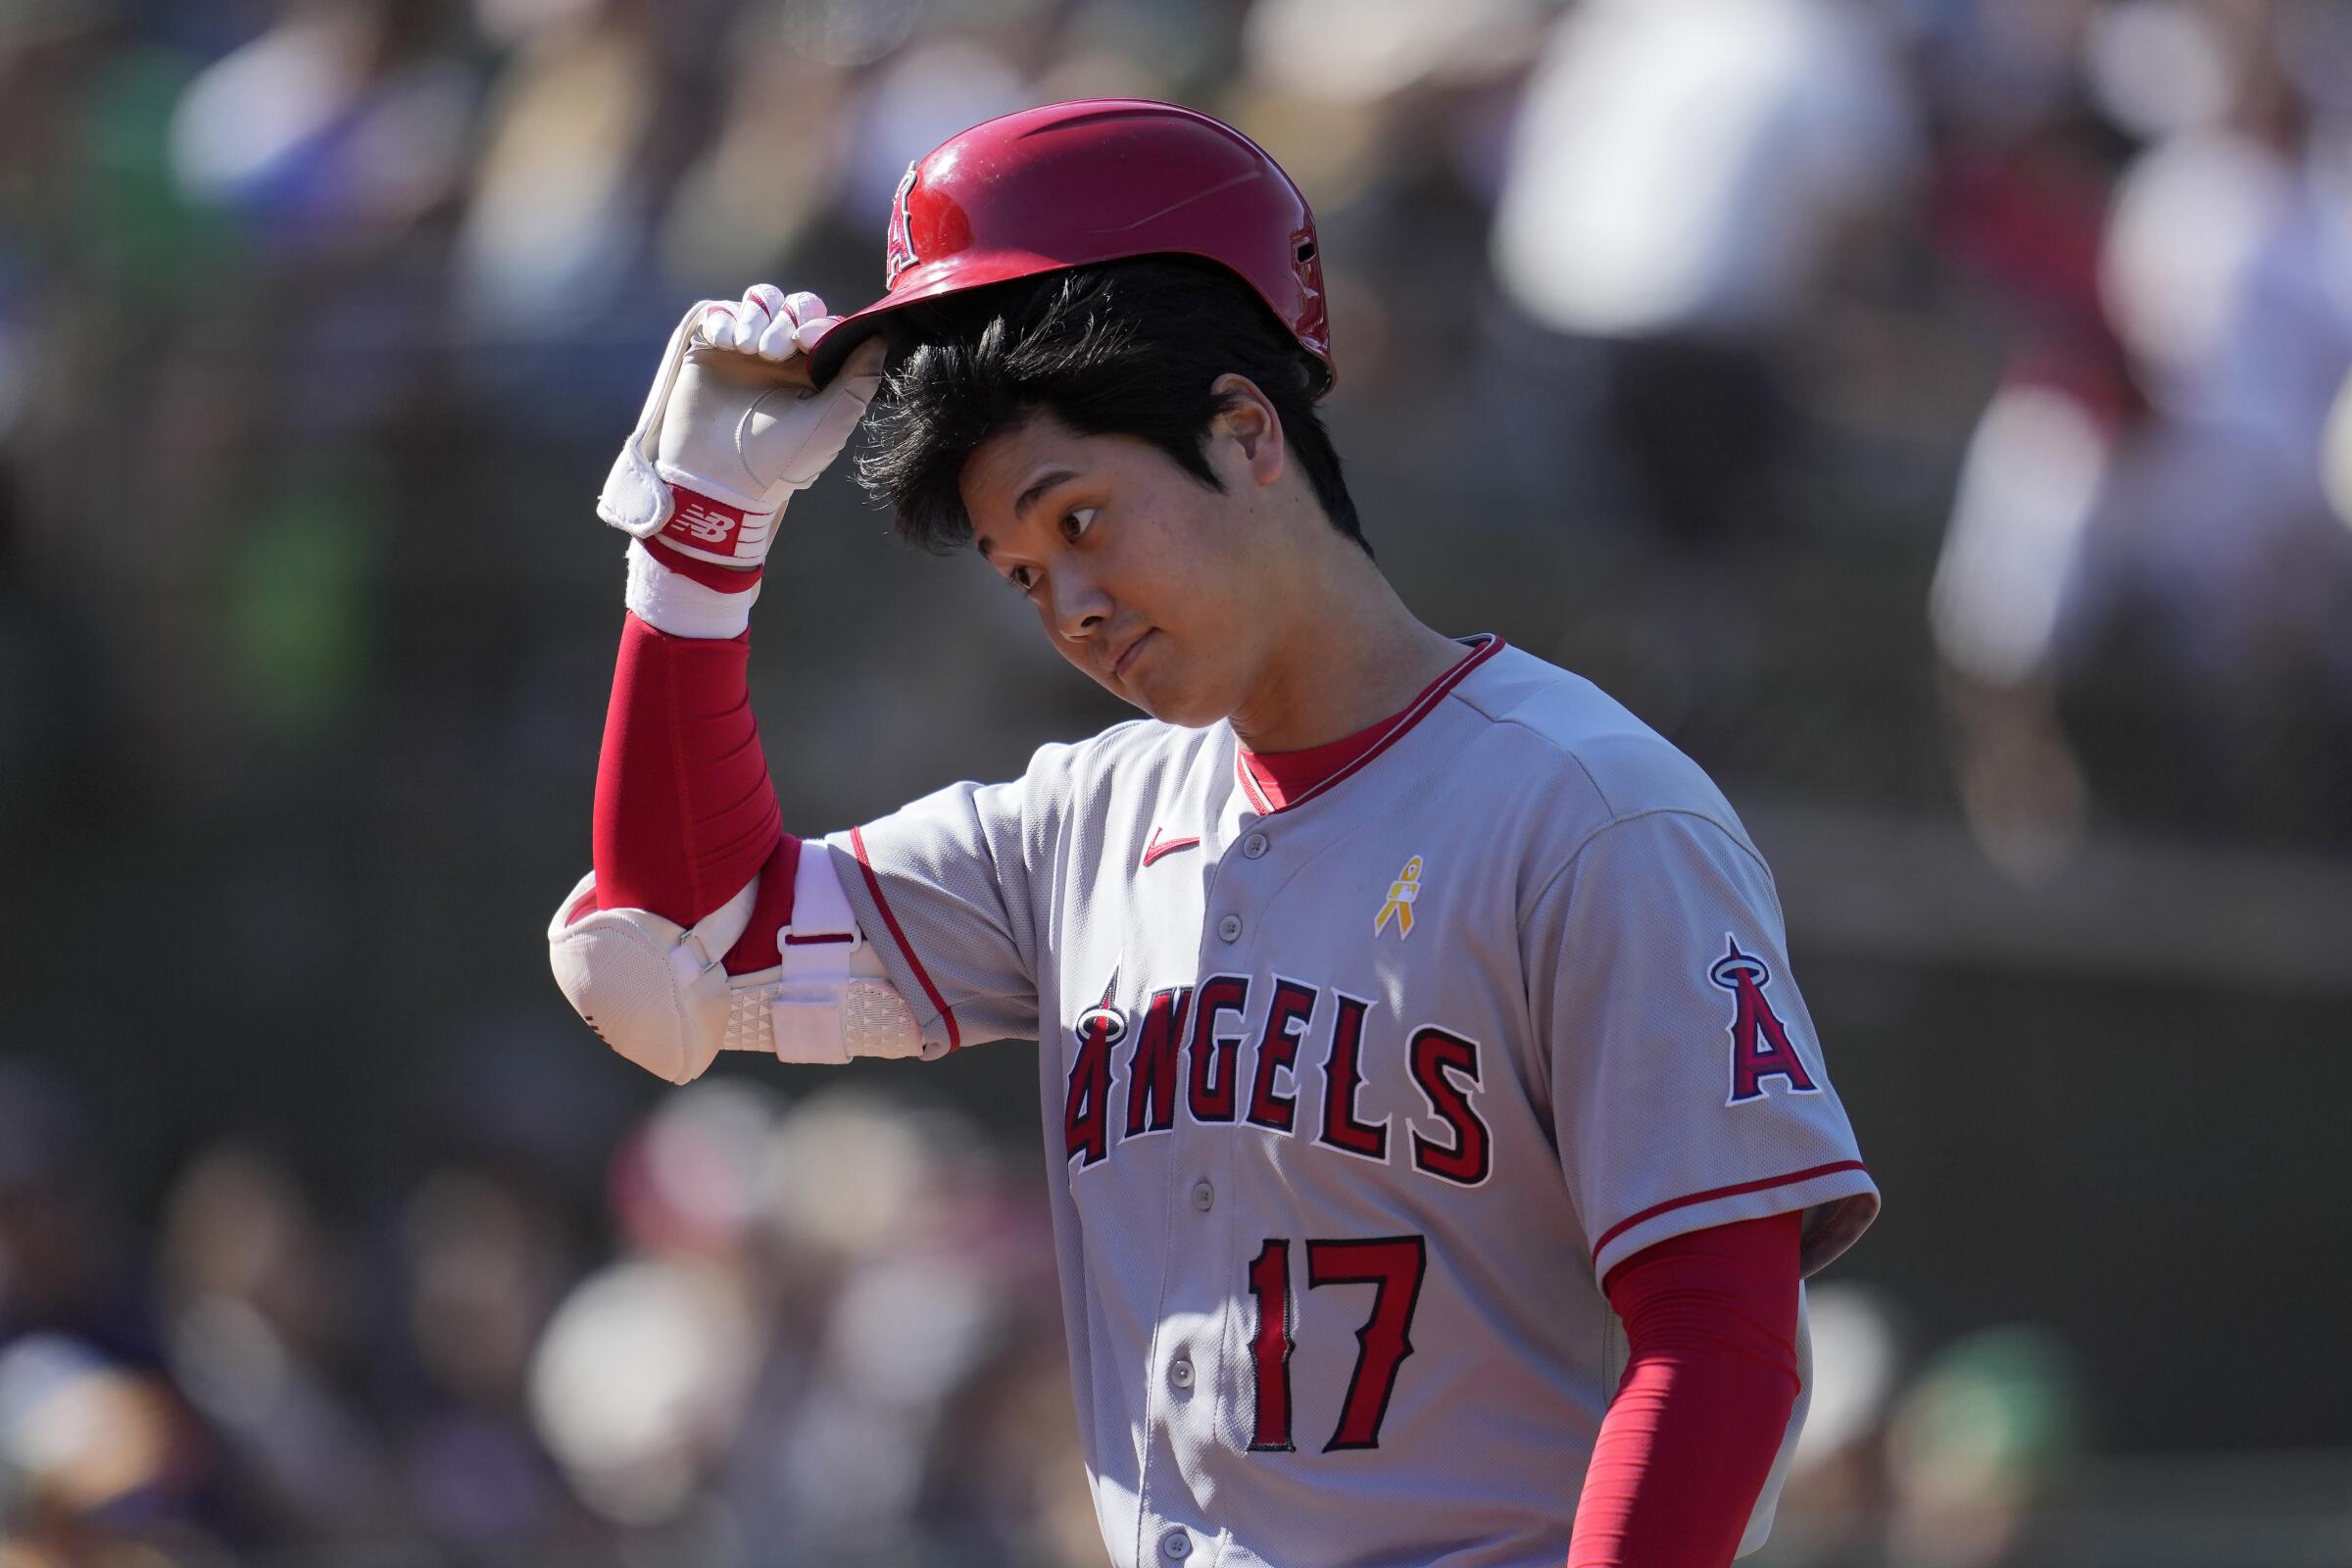 Angels star Shohei Ohtani removes his batting helmet as walks to the dugout after striking out.